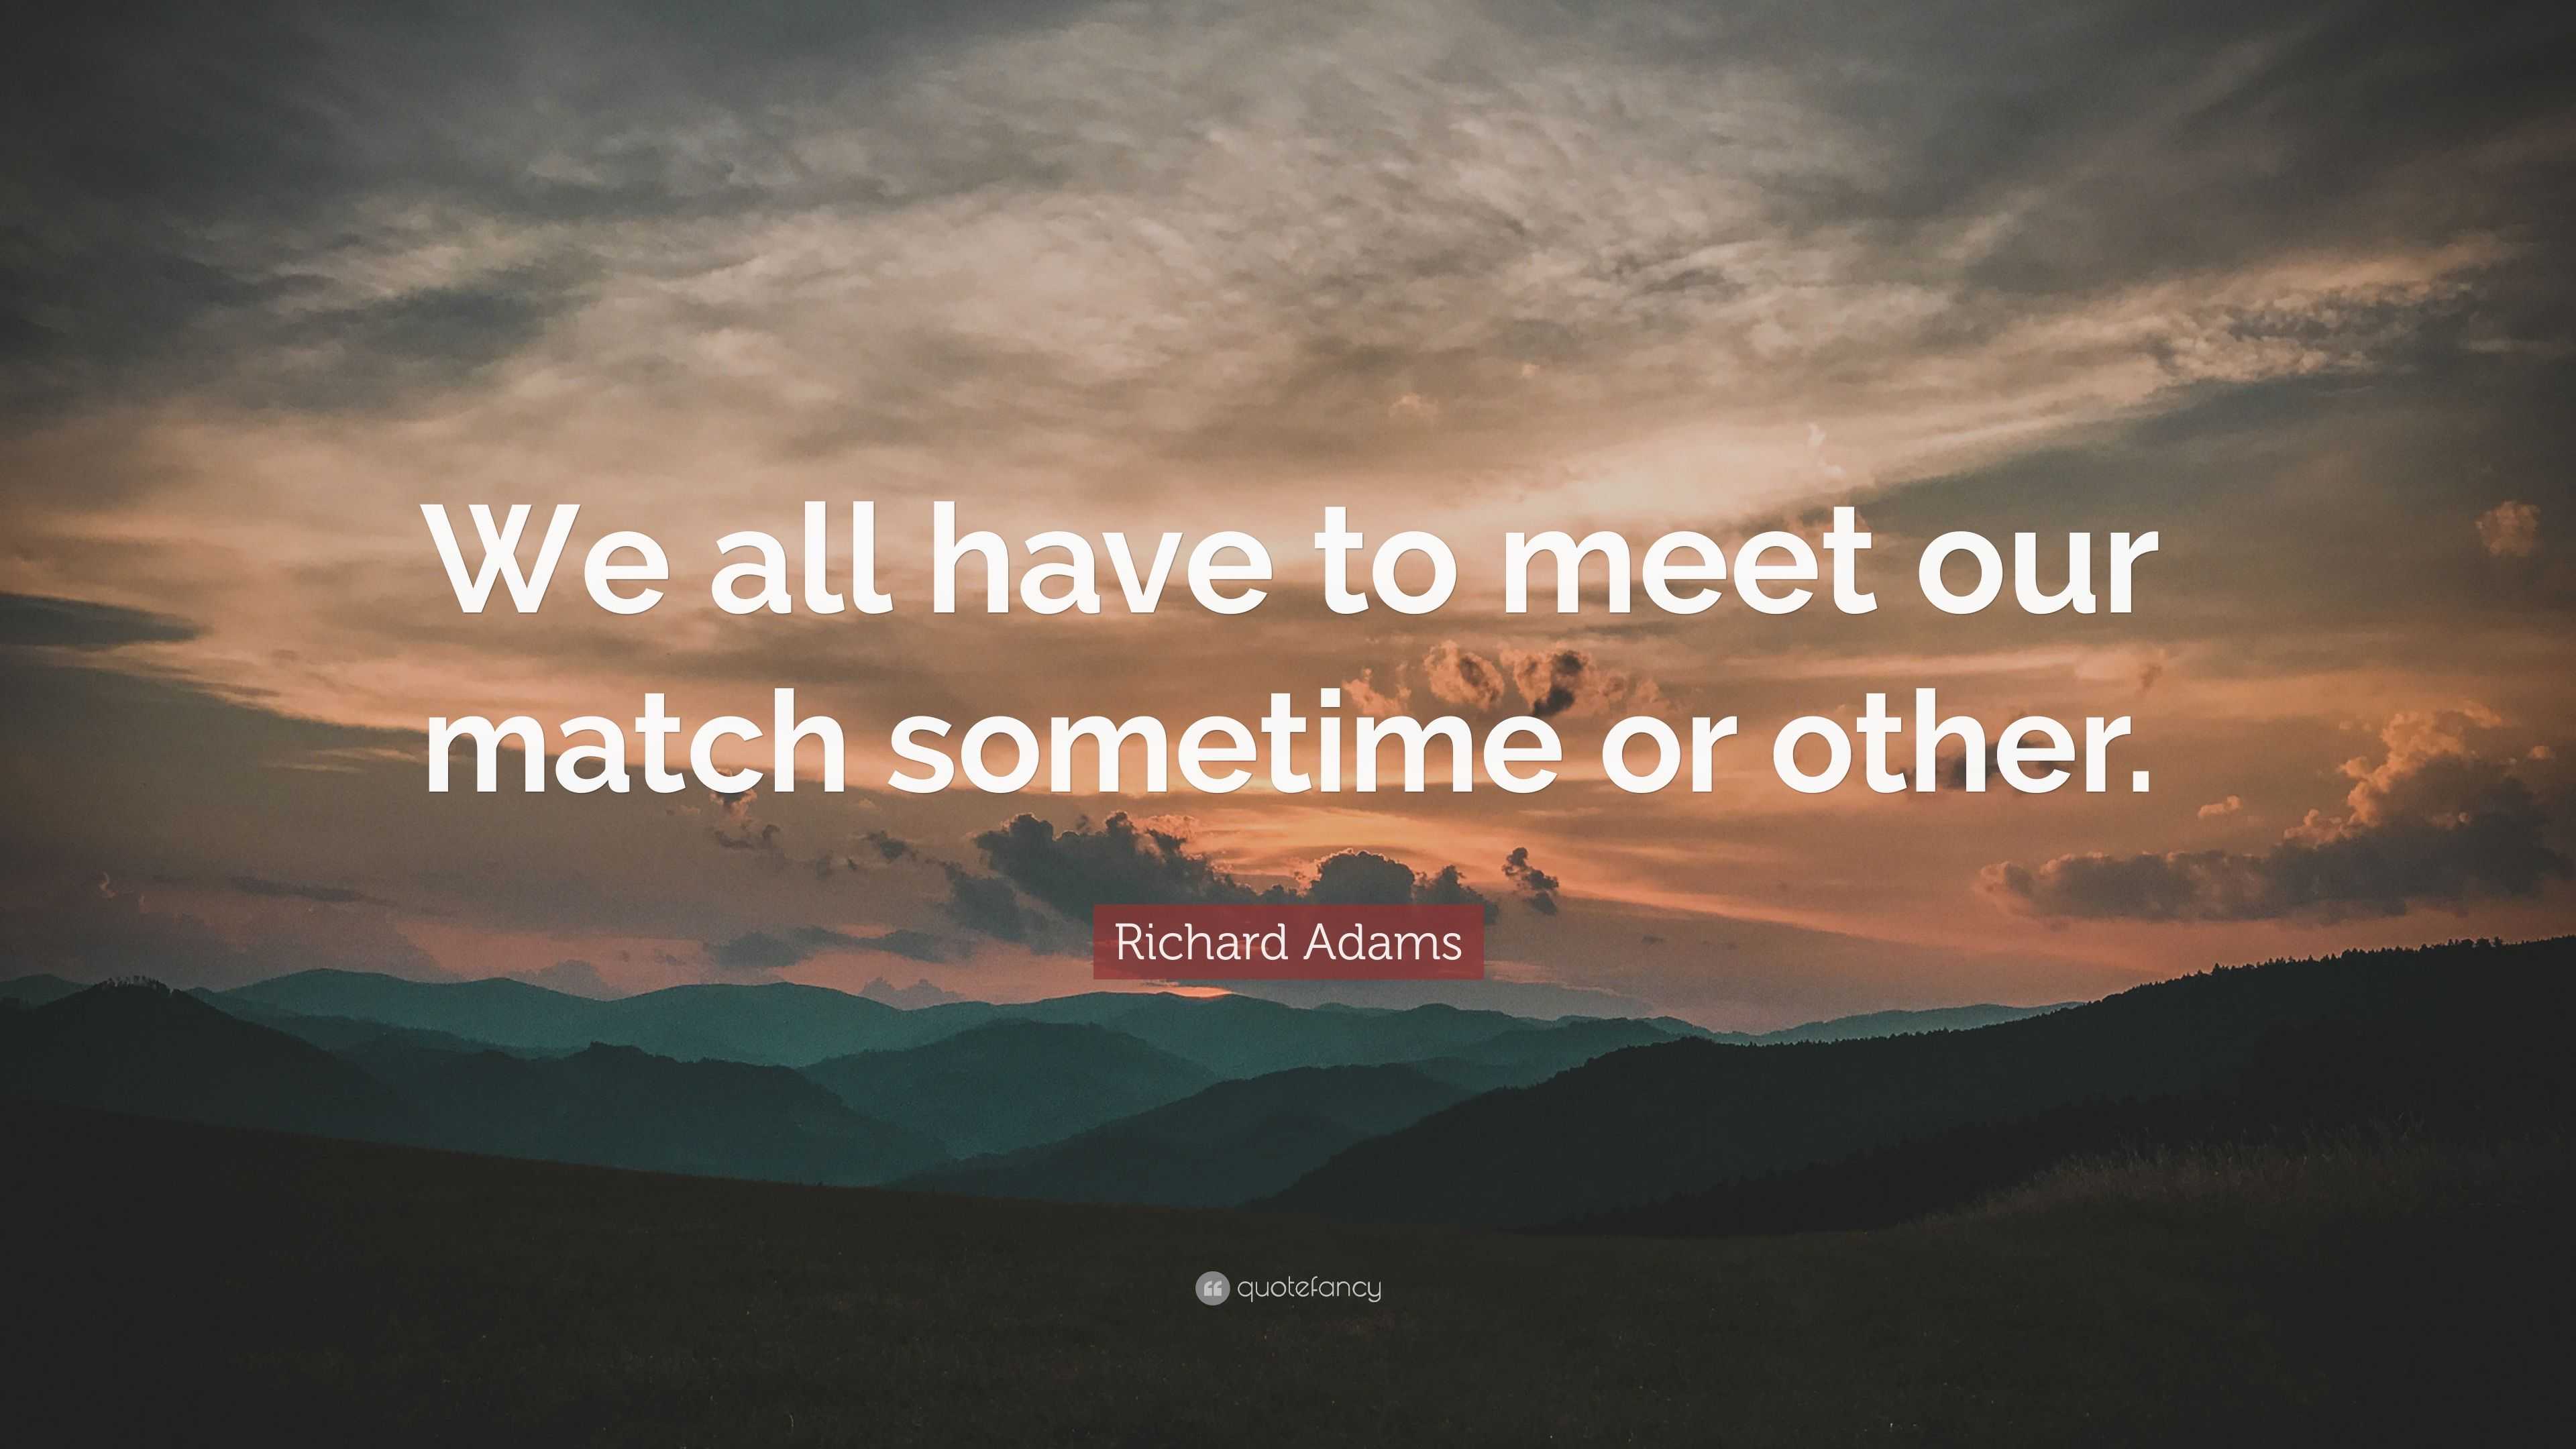 Richard Adams Quote “we All Have To Meet Our Match Sometime Or Other” 